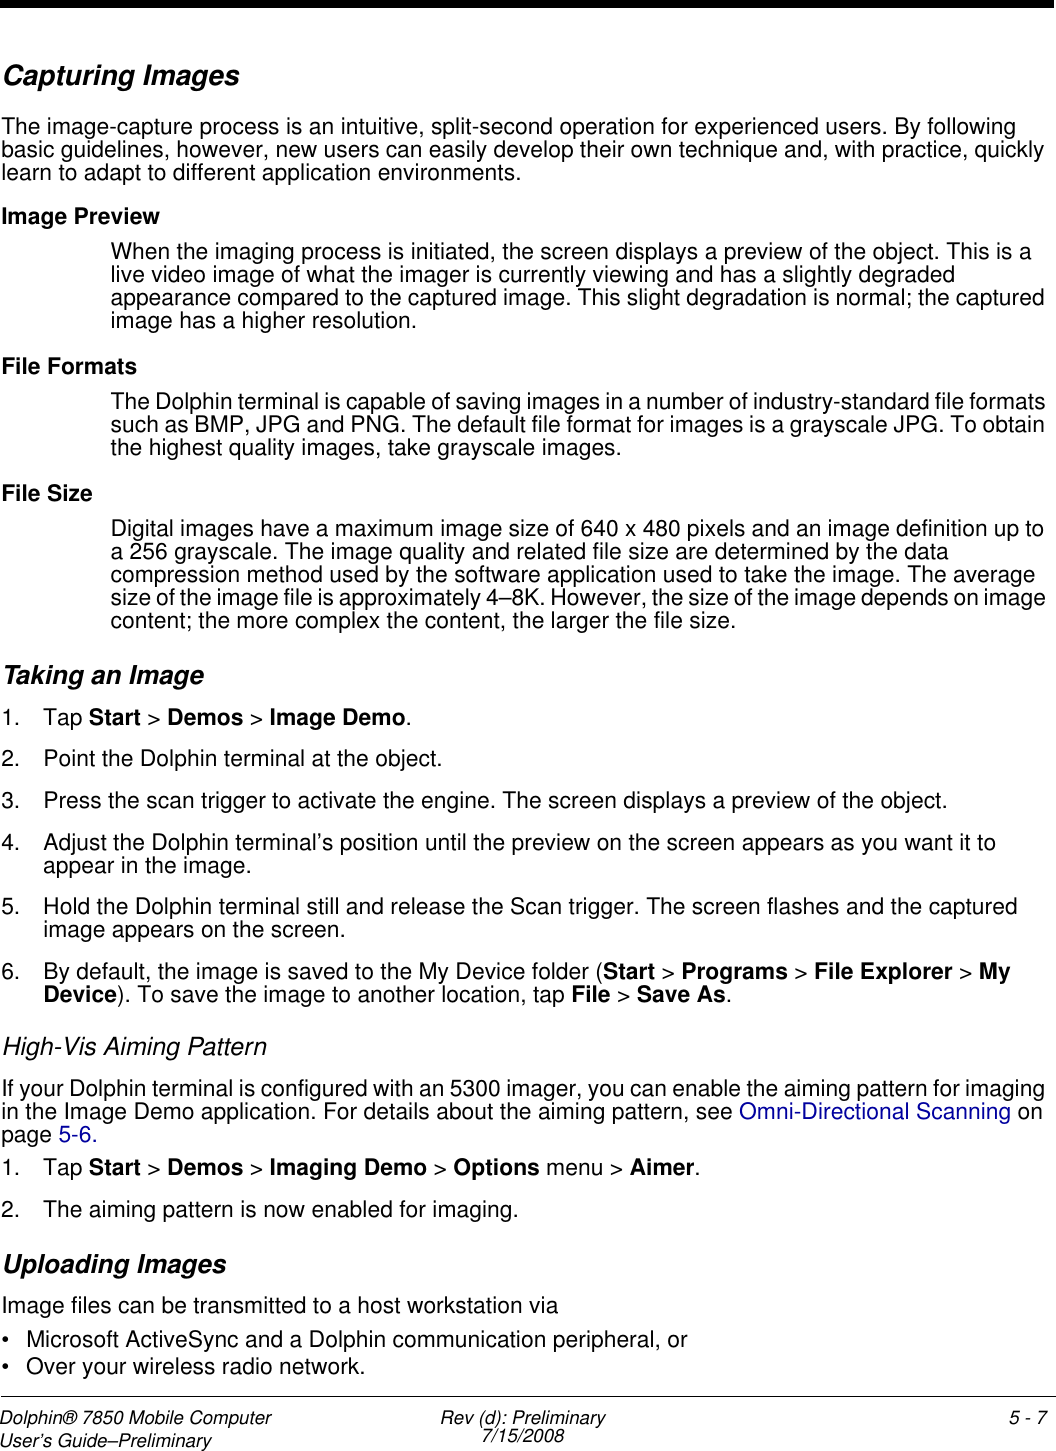 Dolphin® 7850 Mobile Computer  User’s Guide–Preliminary  Rev (d): Preliminary7/15/2008 5 - 7Capturing ImagesThe image-capture process is an intuitive, split-second operation for experienced users. By following basic guidelines, however, new users can easily develop their own technique and, with practice, quickly learn to adapt to different application environments.Image PreviewWhen the imaging process is initiated, the screen displays a preview of the object. This is a live video image of what the imager is currently viewing and has a slightly degraded appearance compared to the captured image. This slight degradation is normal; the captured image has a higher resolution.File FormatsThe Dolphin terminal is capable of saving images in a number of industry-standard file formats such as BMP, JPG and PNG. The default file format for images is a grayscale JPG. To obtain the highest quality images, take grayscale images.File SizeDigital images have a maximum image size of 640 x 480 pixels and an image definition up to a 256 grayscale. The image quality and related file size are determined by the data compression method used by the software application used to take the image. The average size of the image file is approximately 4–8K. However, the size of the image depends on image content; the more complex the content, the larger the file size. Taking an Image1. Tap Start &gt; Demos &gt; Image Demo.2. Point the Dolphin terminal at the object.3. Press the scan trigger to activate the engine. The screen displays a preview of the object.4. Adjust the Dolphin terminal’s position until the preview on the screen appears as you want it to appear in the image.5. Hold the Dolphin terminal still and release the Scan trigger. The screen flashes and the captured image appears on the screen. 6. By default, the image is saved to the My Device folder (Start &gt; Programs &gt; File Explorer &gt; My Device). To save the image to another location, tap File &gt; Save As.High-Vis Aiming PatternIf your Dolphin terminal is configured with an 5300 imager, you can enable the aiming pattern for imaging in the Image Demo application. For details about the aiming pattern, see Omni-Directional Scanning on page 5-6.1. Tap Start &gt; Demos &gt; Imaging Demo &gt; Options menu &gt; Aimer.2. The aiming pattern is now enabled for imaging.Uploading ImagesImage files can be transmitted to a host workstation via • Microsoft ActiveSync and a Dolphin communication peripheral, or • Over your wireless radio network.